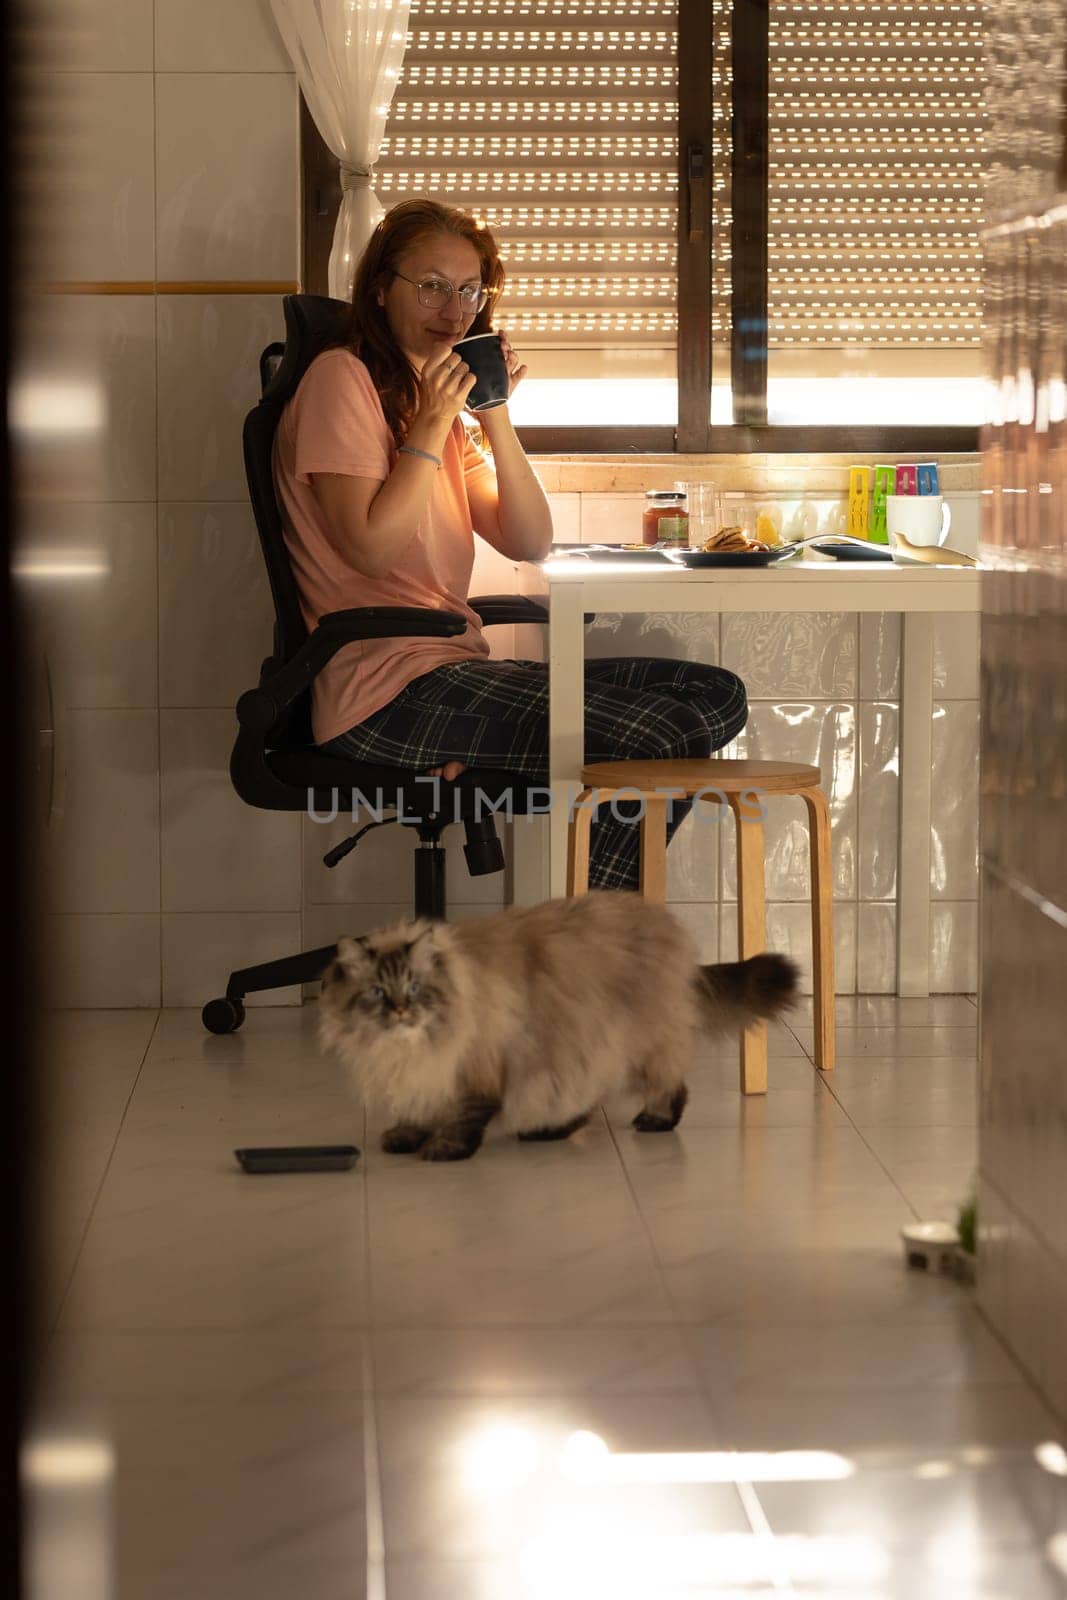 An adult woman sits at the kitchen table and drinks coffee - a cat sits next to her on the floor. Vertical shot